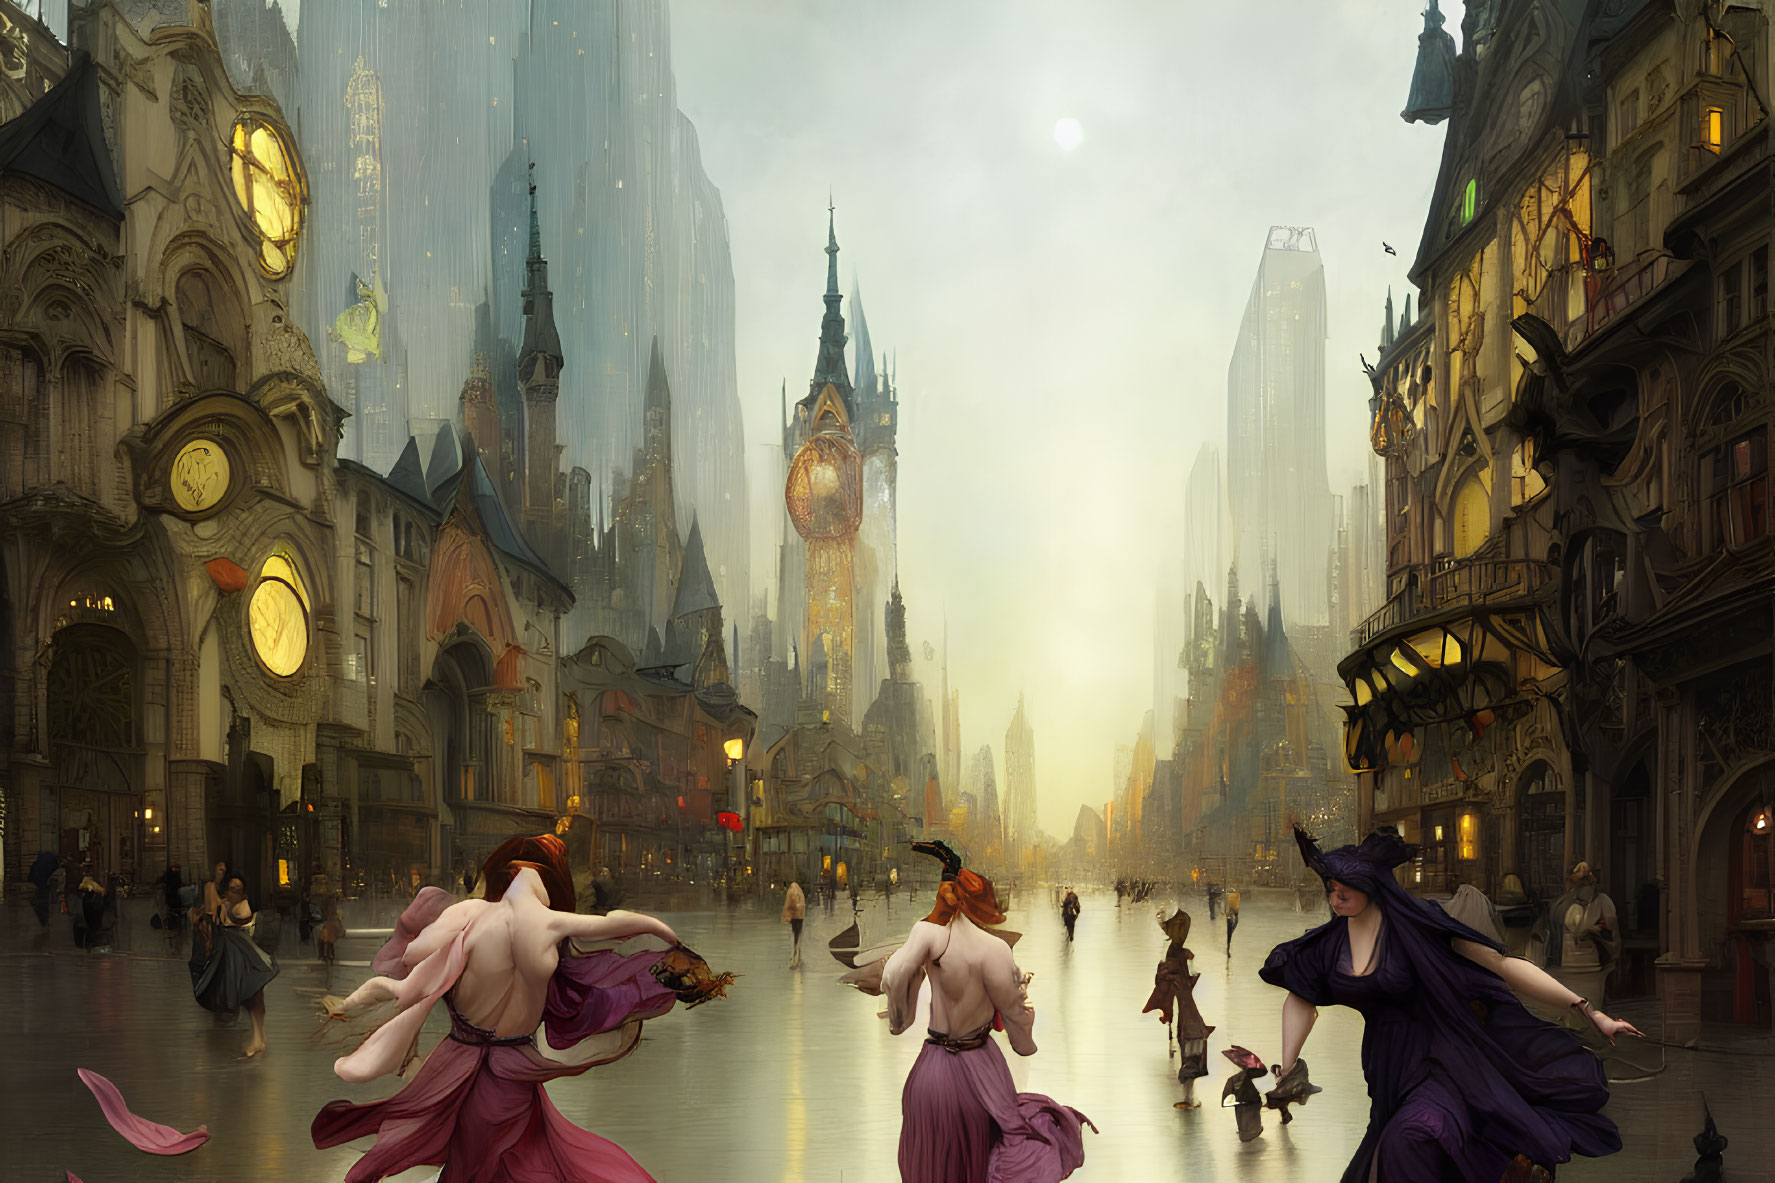 Fantastical cityscape with towering spires and elegant figures in flowing gowns